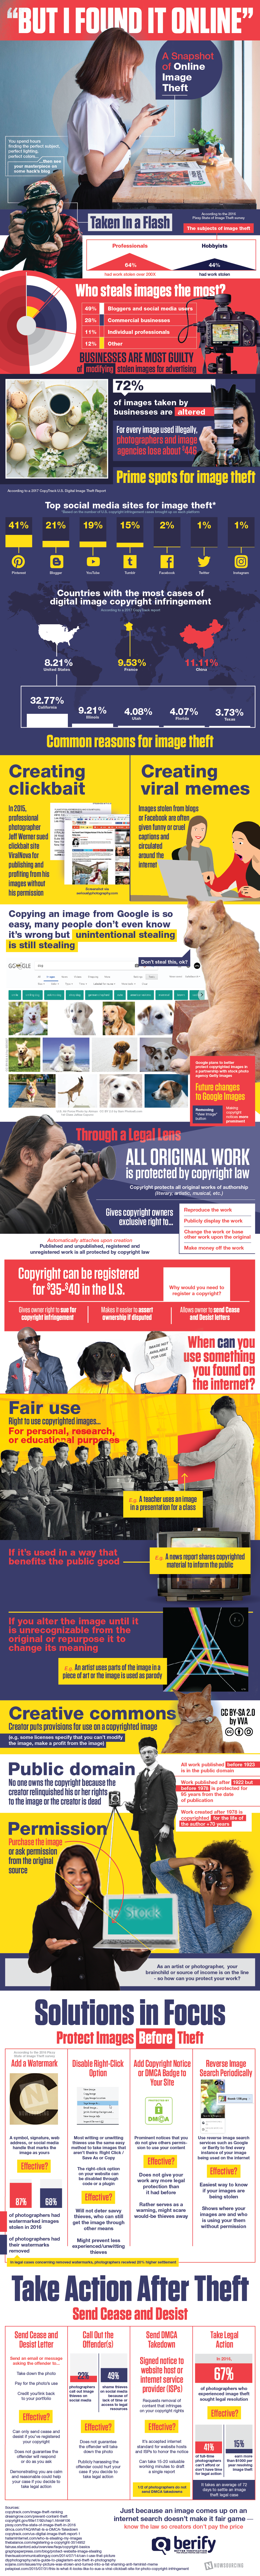 A Snapshot Of Online Image Theft